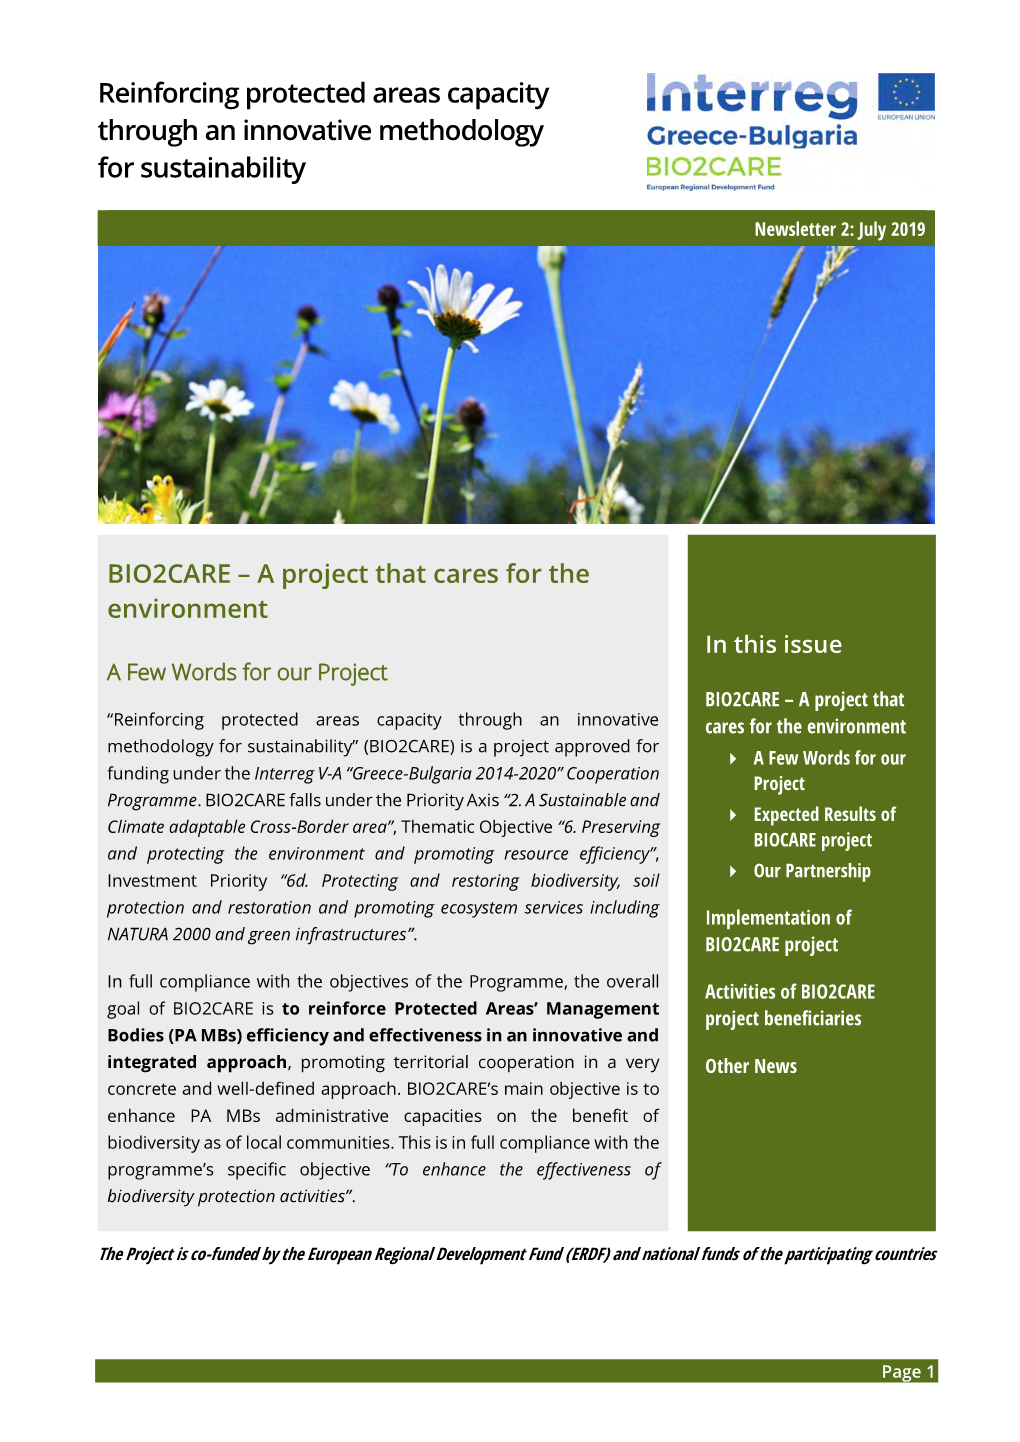 Newsletter Vol.2 of the BIO2CARE Project